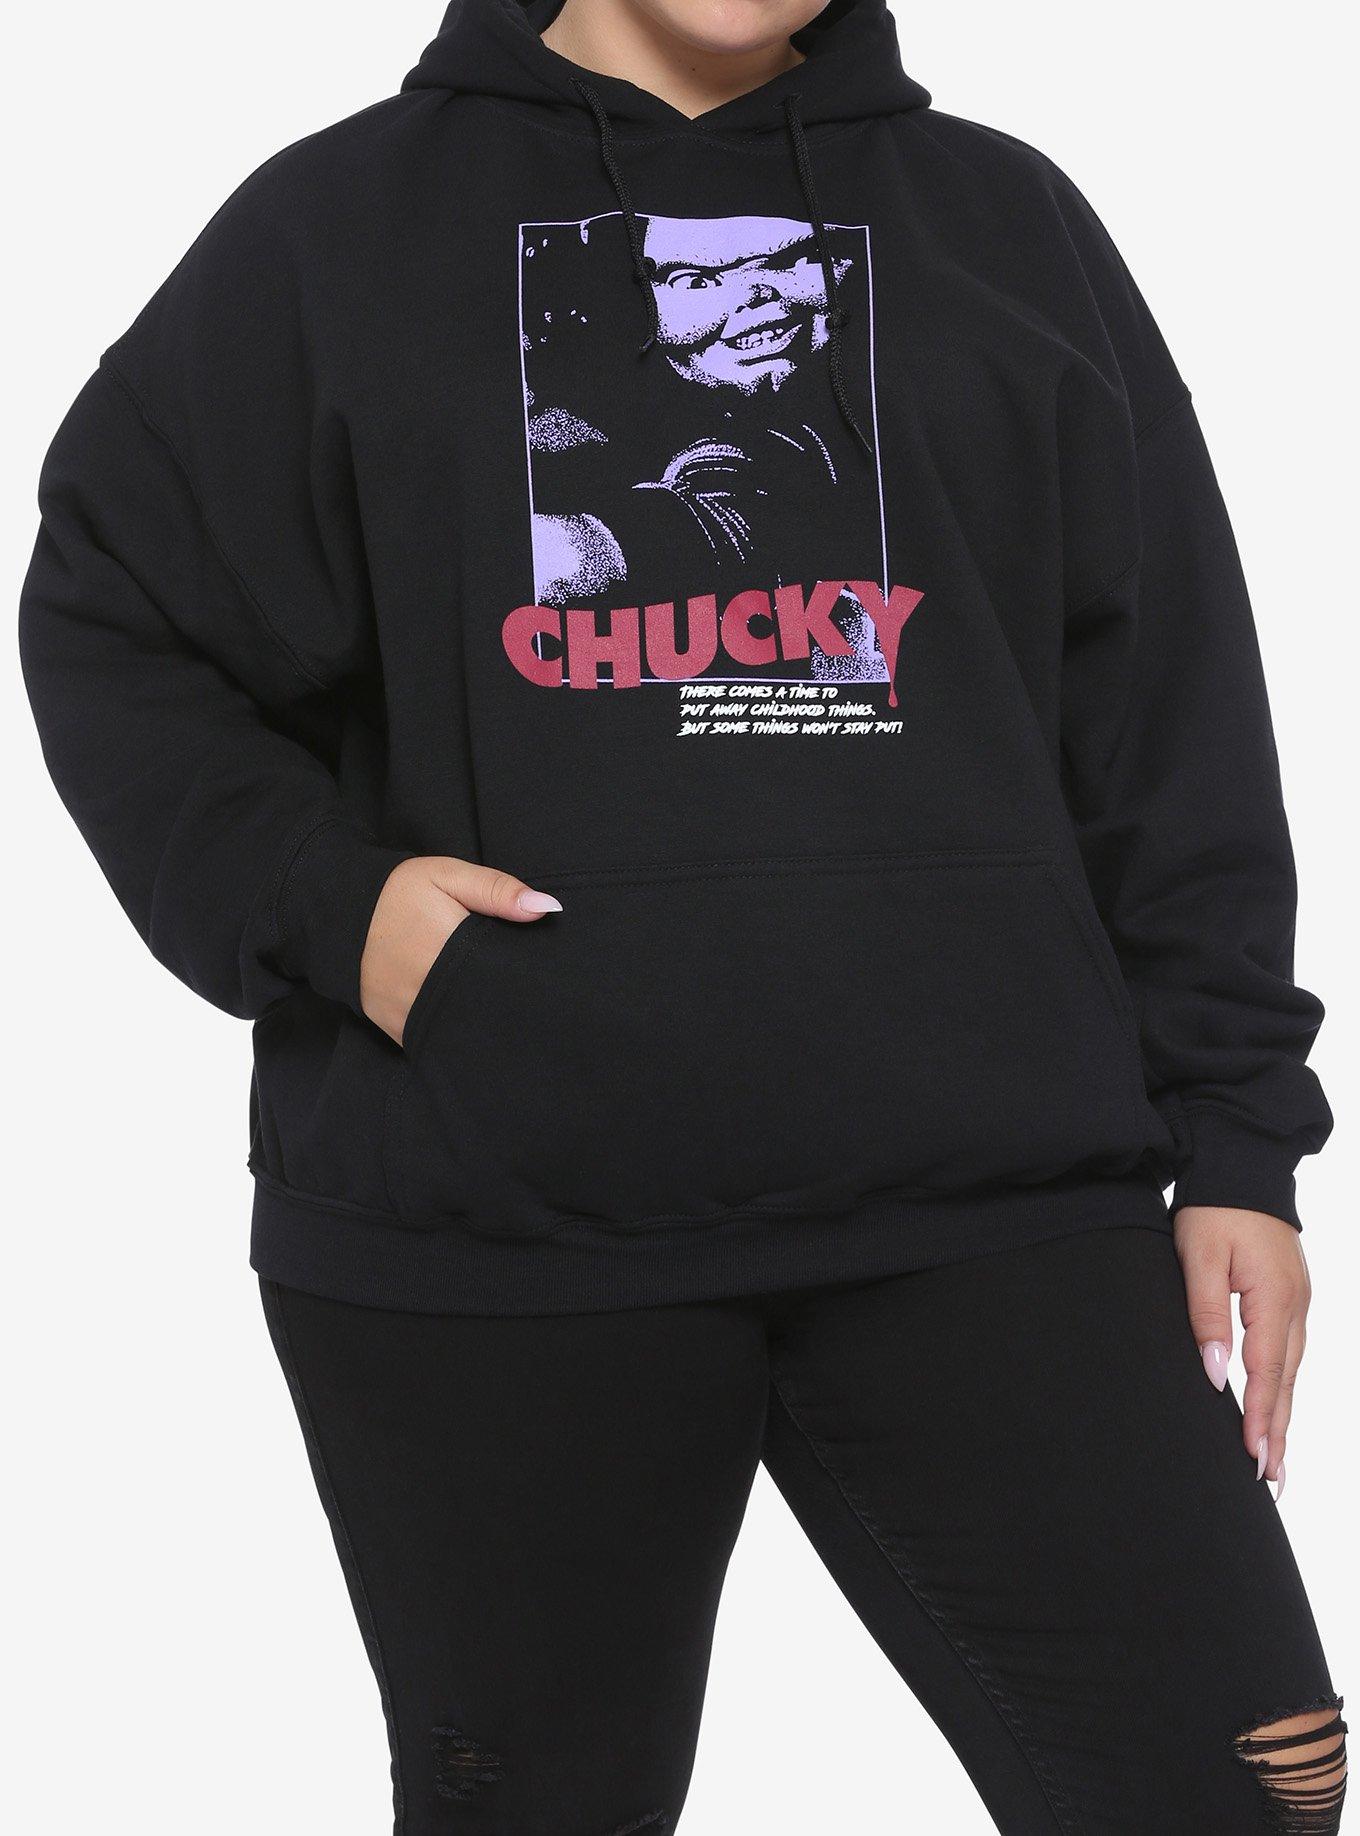 Child's Play Chucky Poster Girls Hoodie Plus Size, MULTI, hi-res